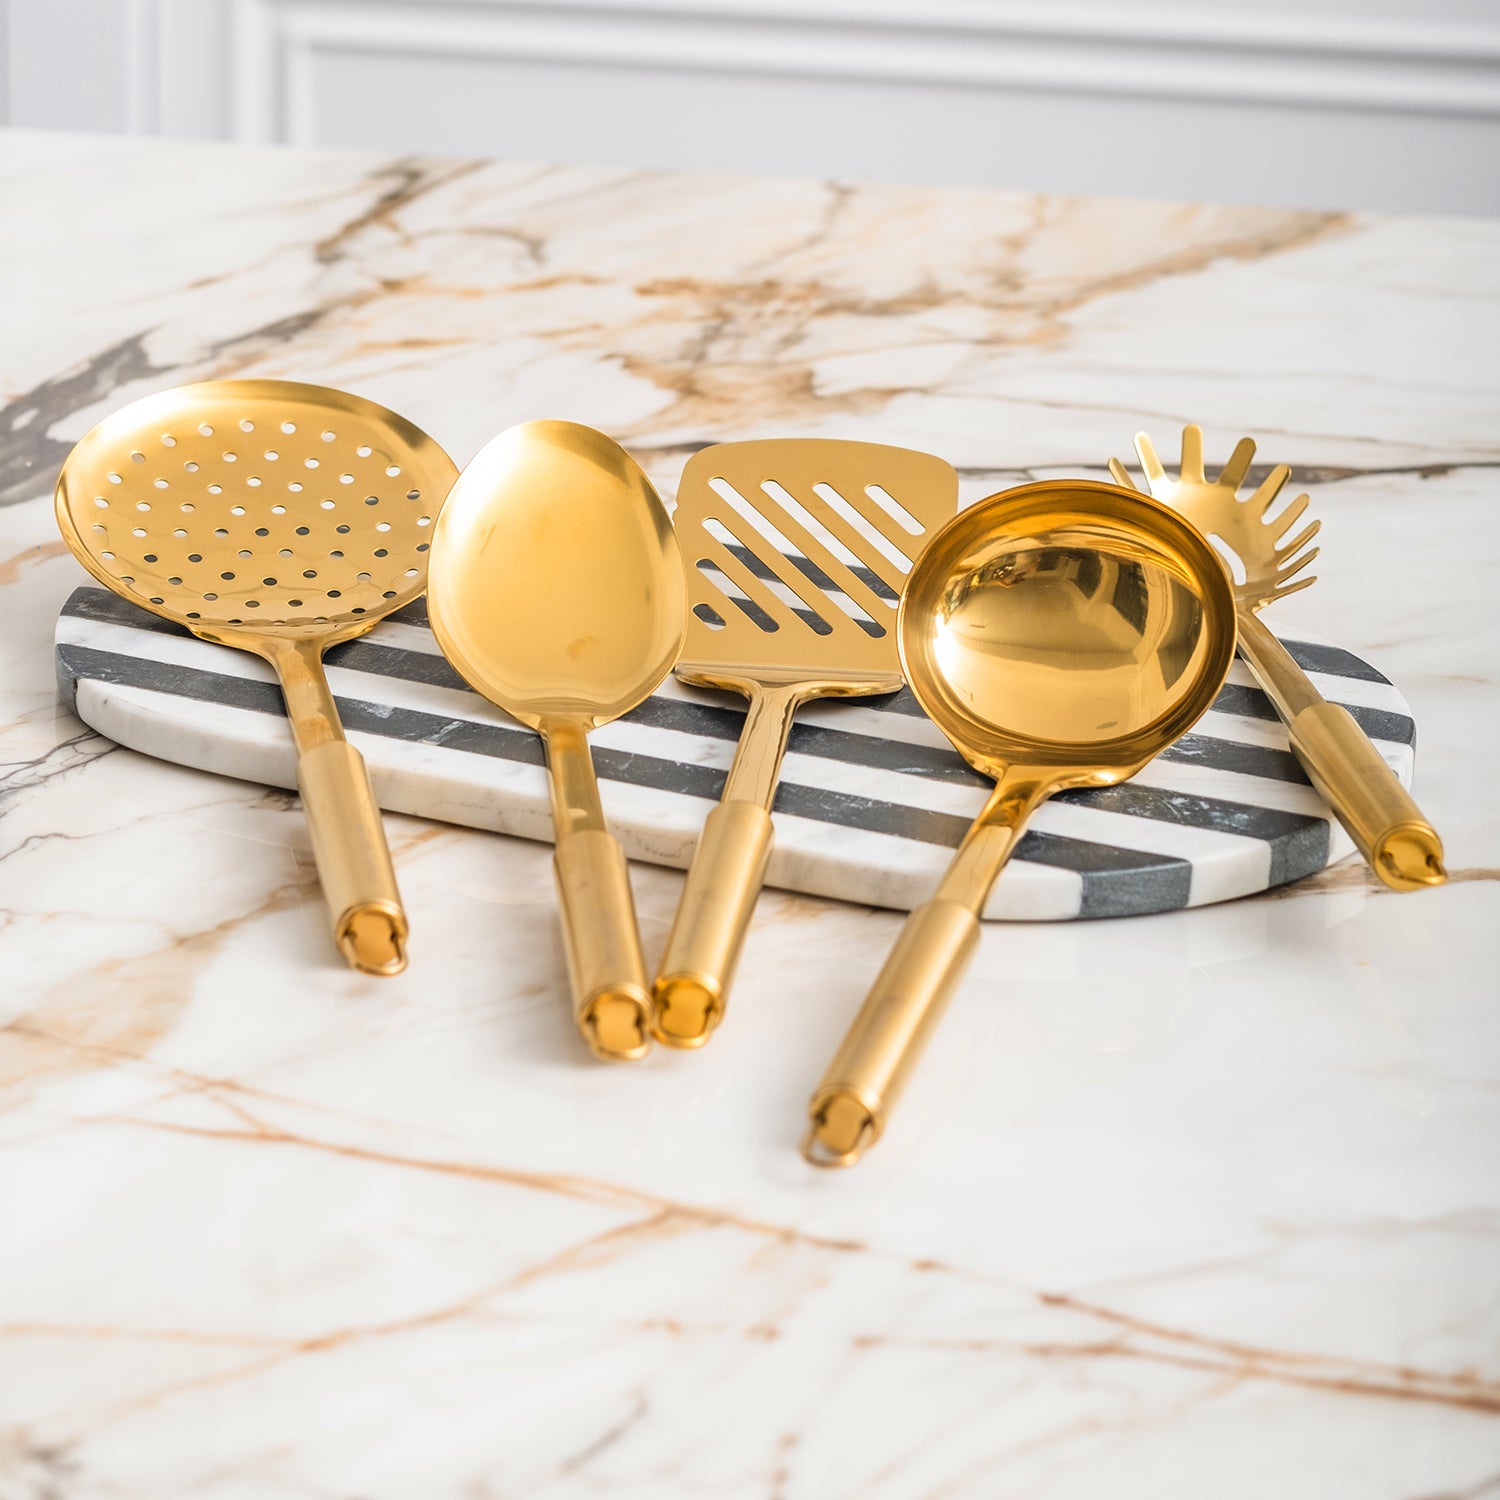 Pretty Utility: Gorgeous Gold Utensils - Swoon Worthy